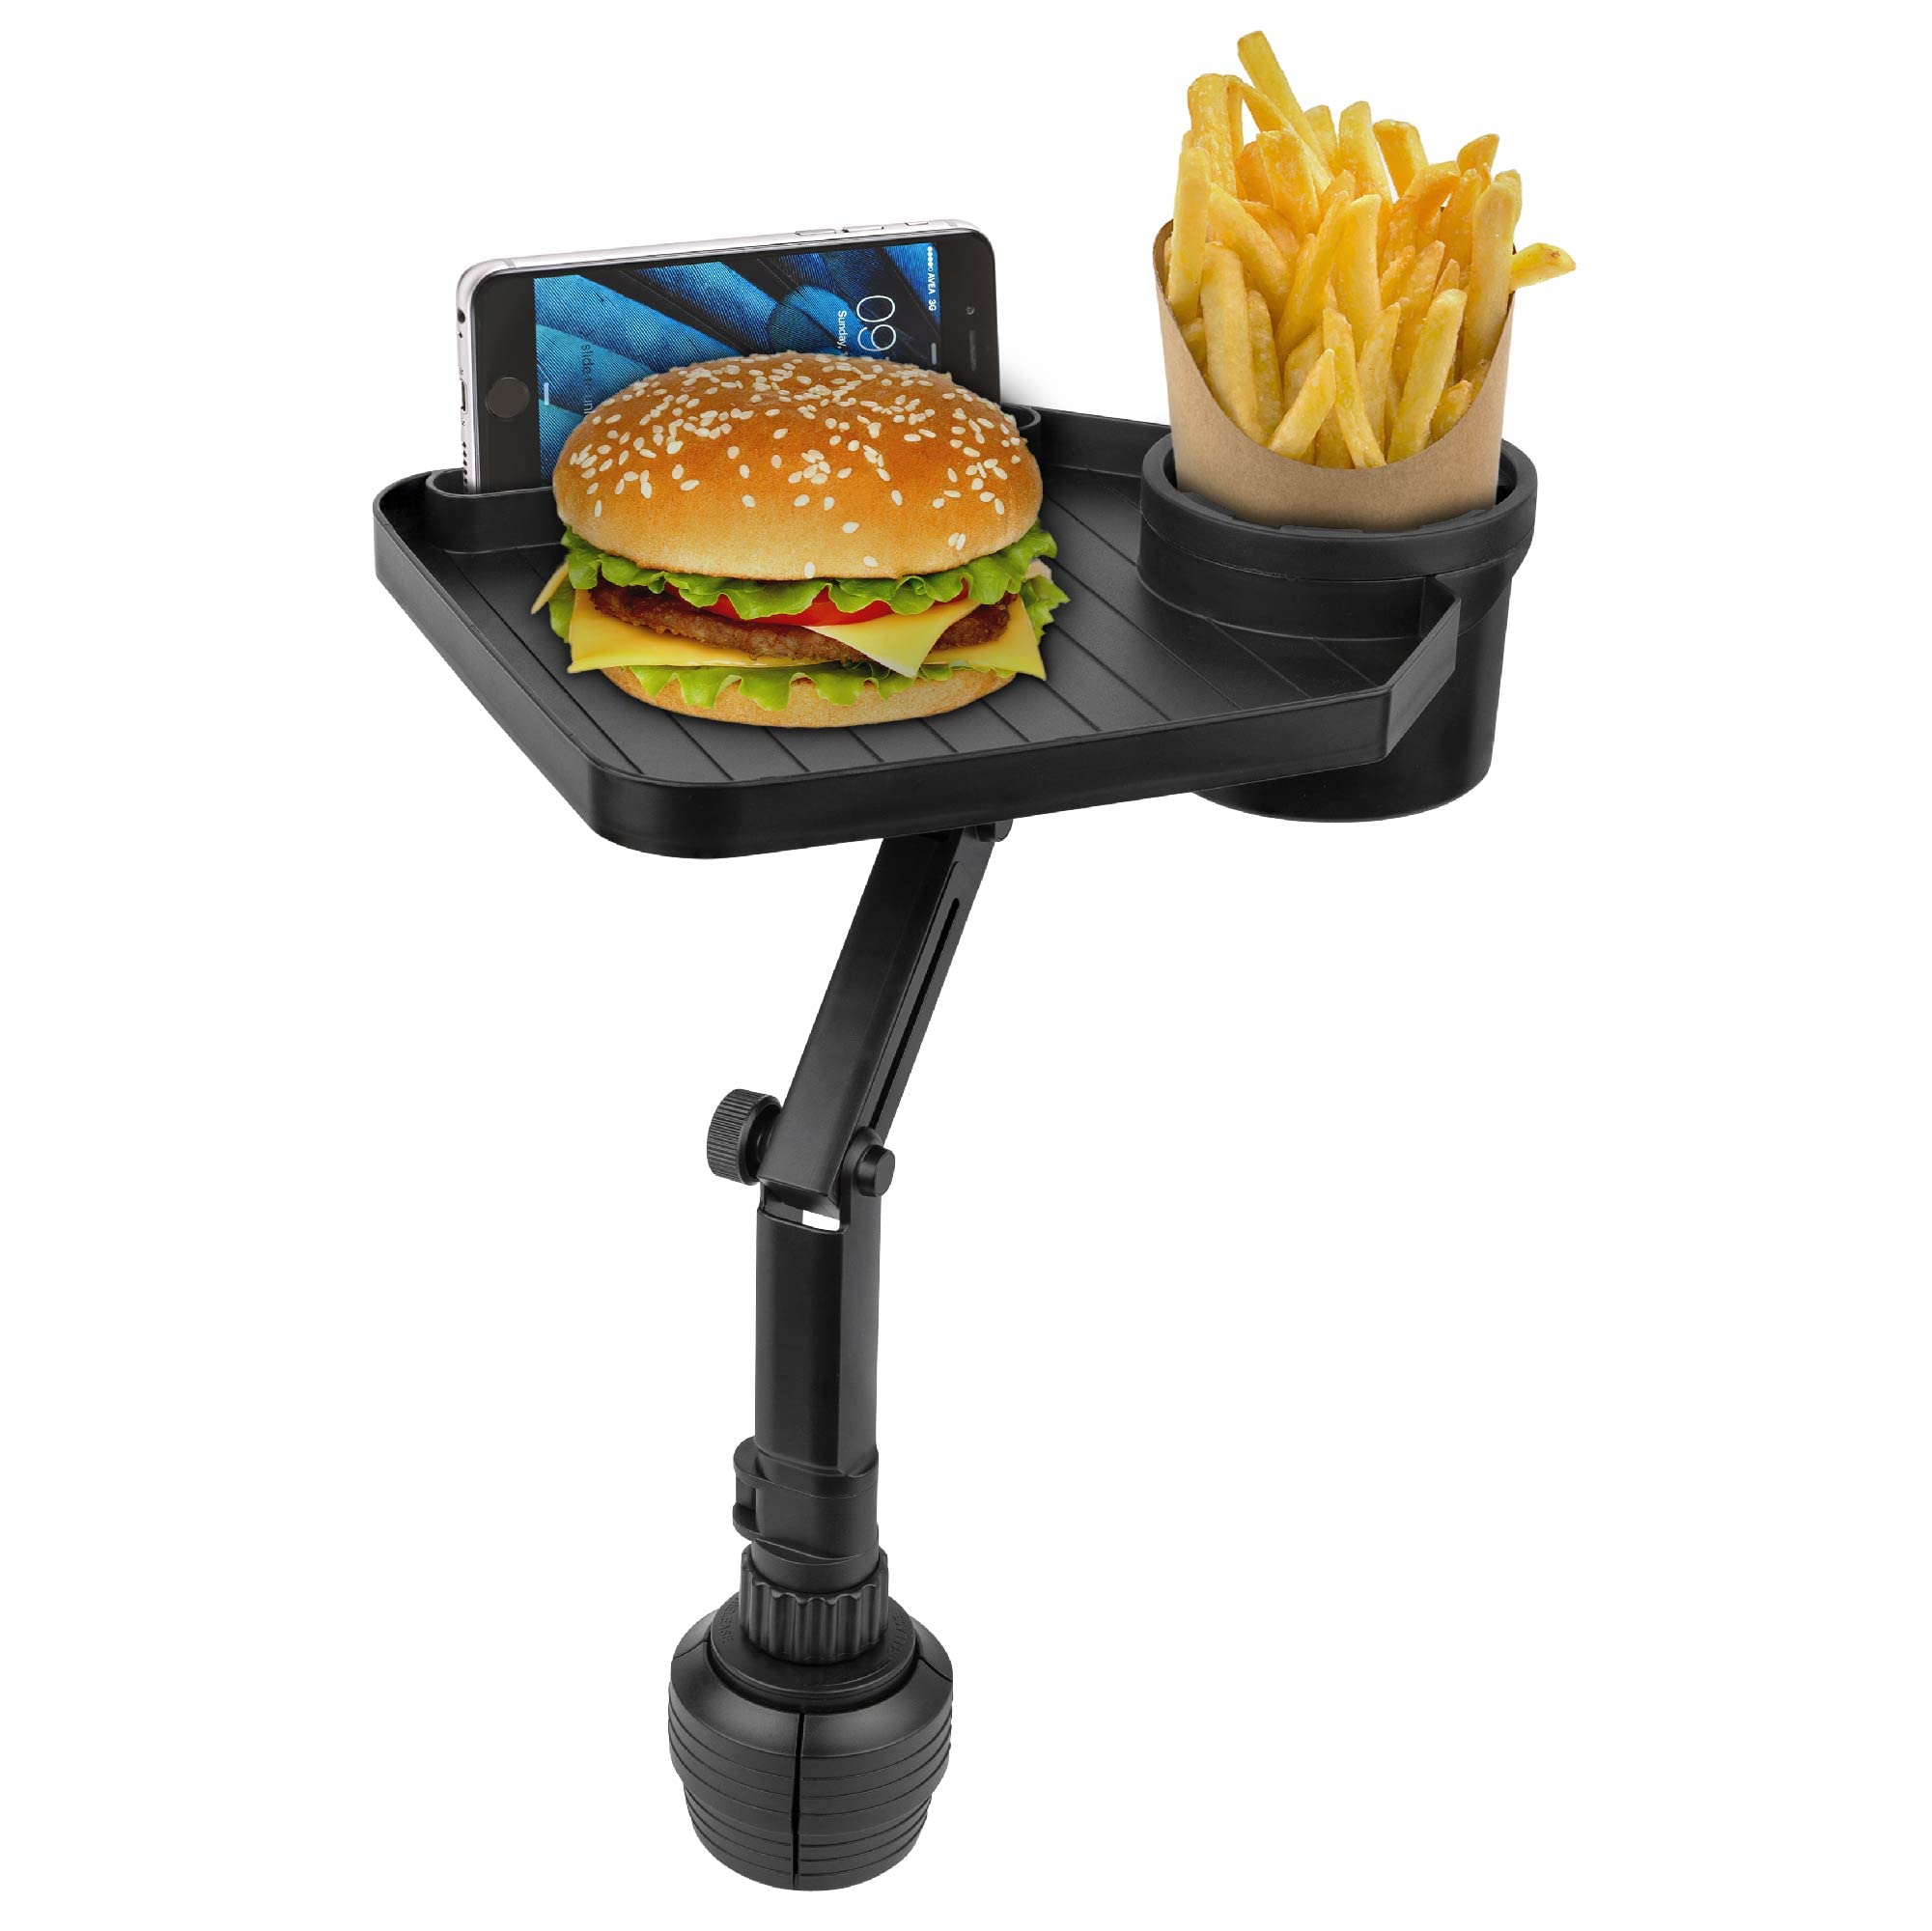 Premium Car Cup Holder Tray - Adjustable Food Tray with Cup Holder & Phone Slot - Premium Car Tray Table with 360� Swivel Arm for Easy Turning from Driver to Passenger Seat - Gift for Men and Women  - Very Good